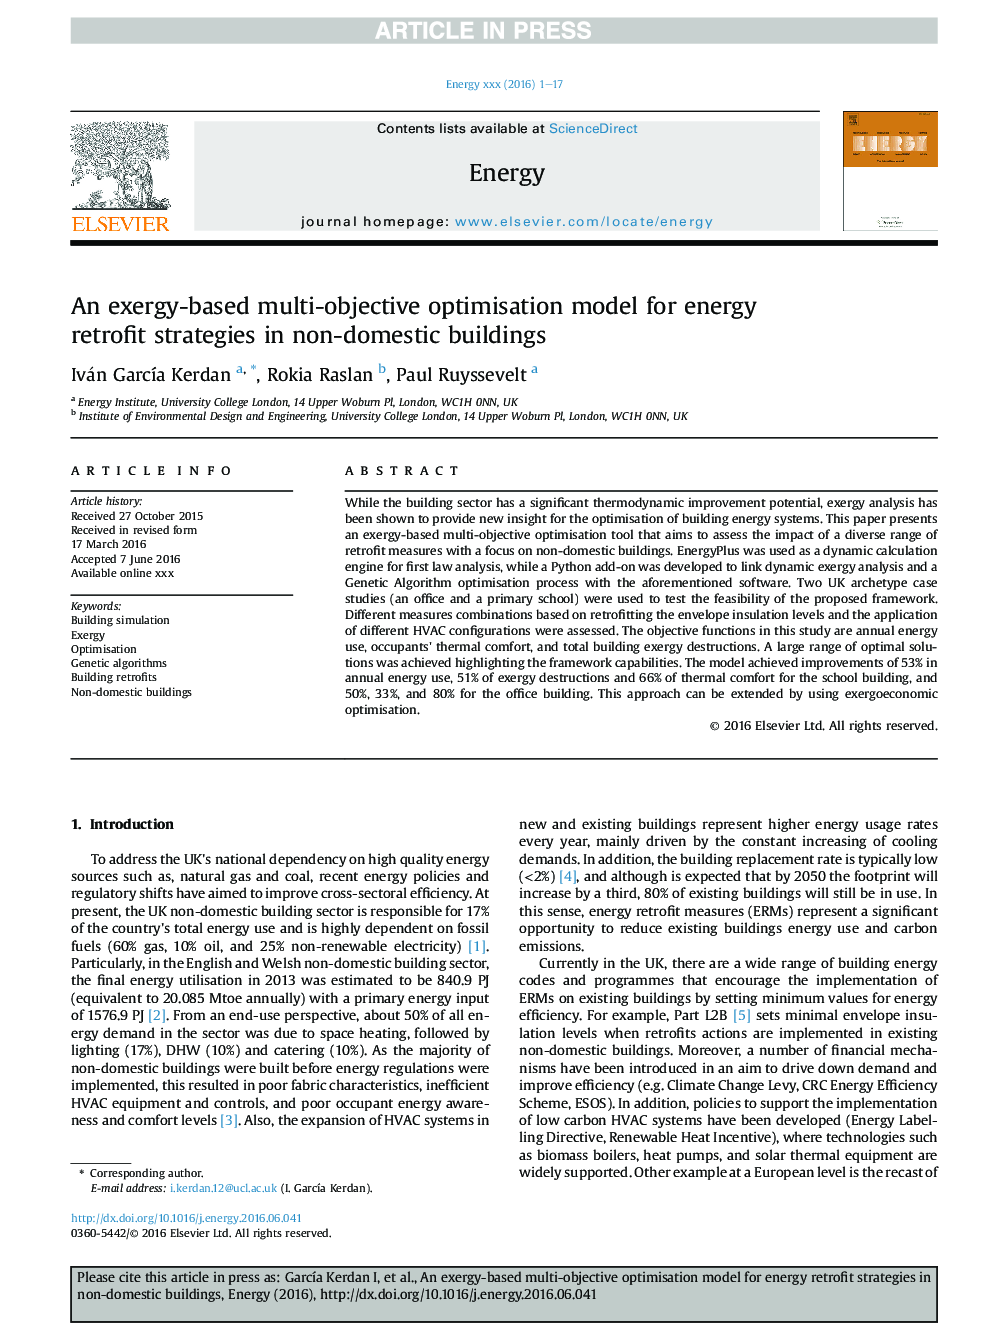 An exergy-based multi-objective optimisation model for energy retrofit strategies in non-domestic buildings